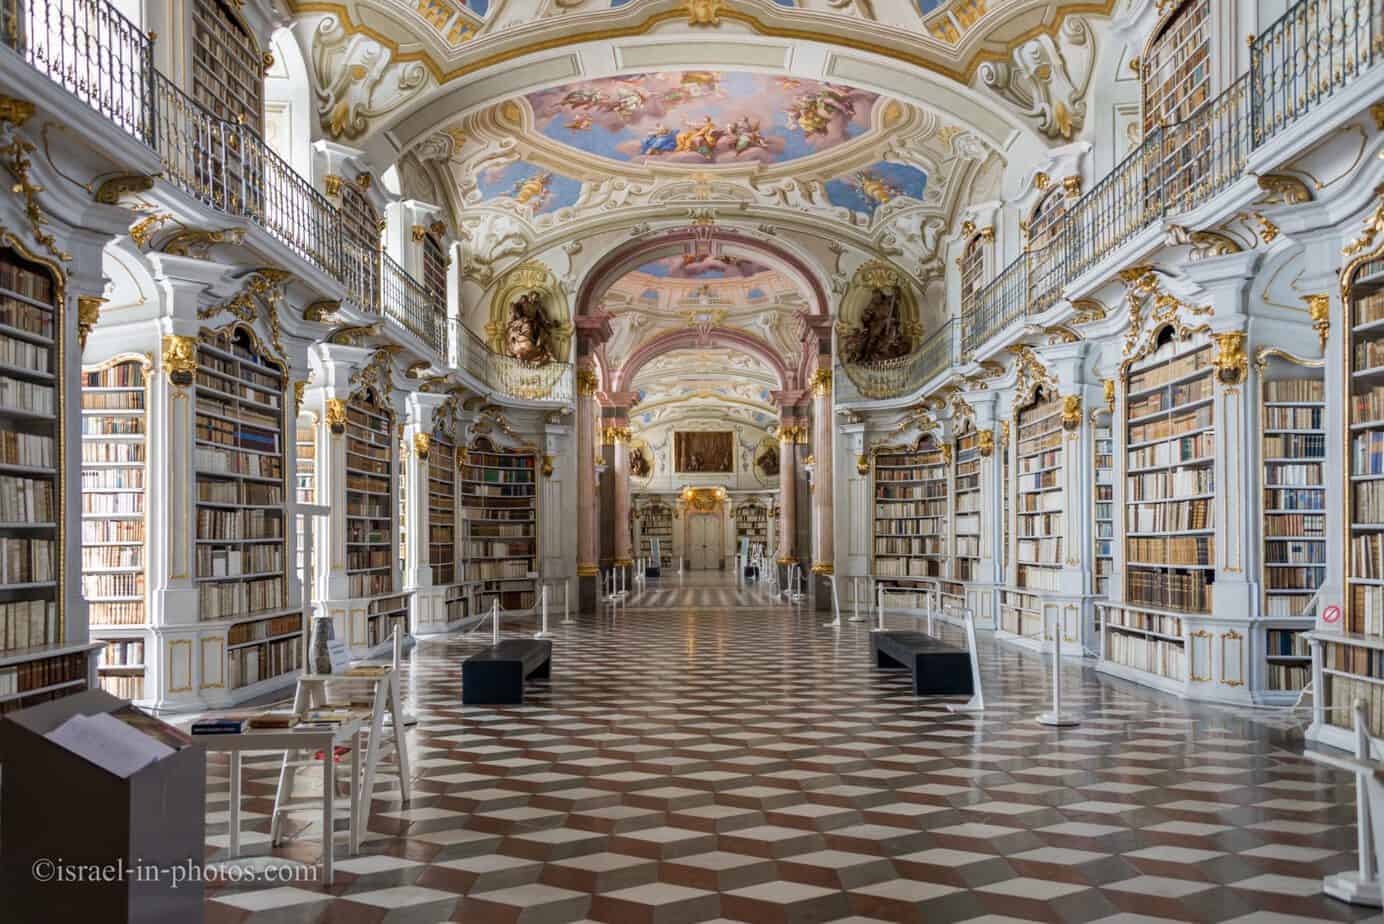 Visit to Admont Abbey in Styria, Austria